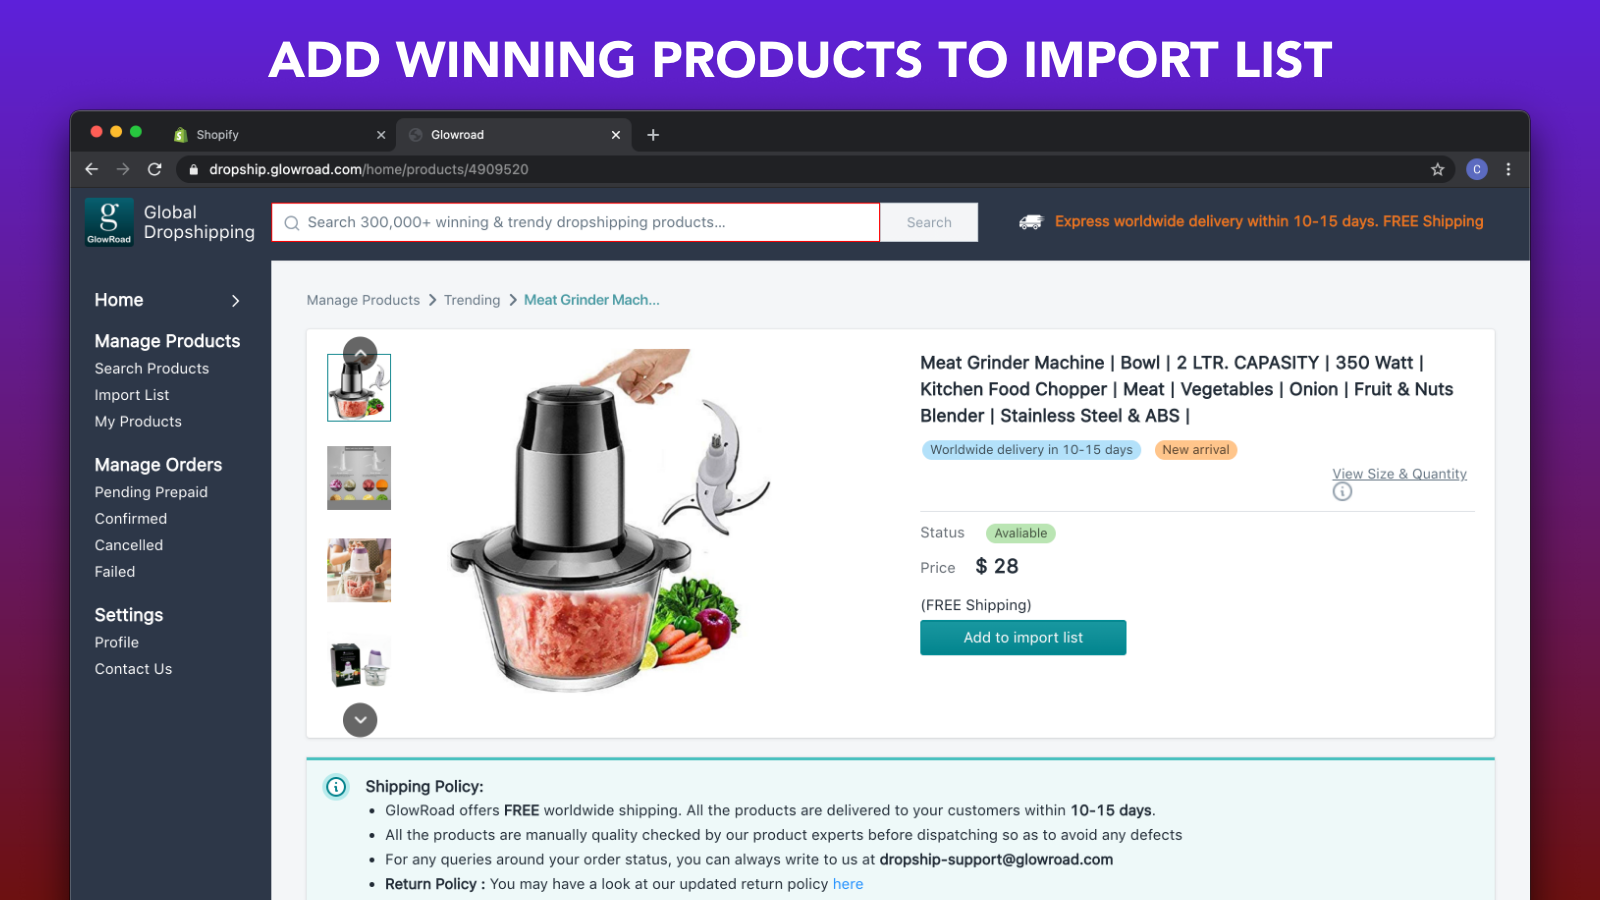 Add products to import list